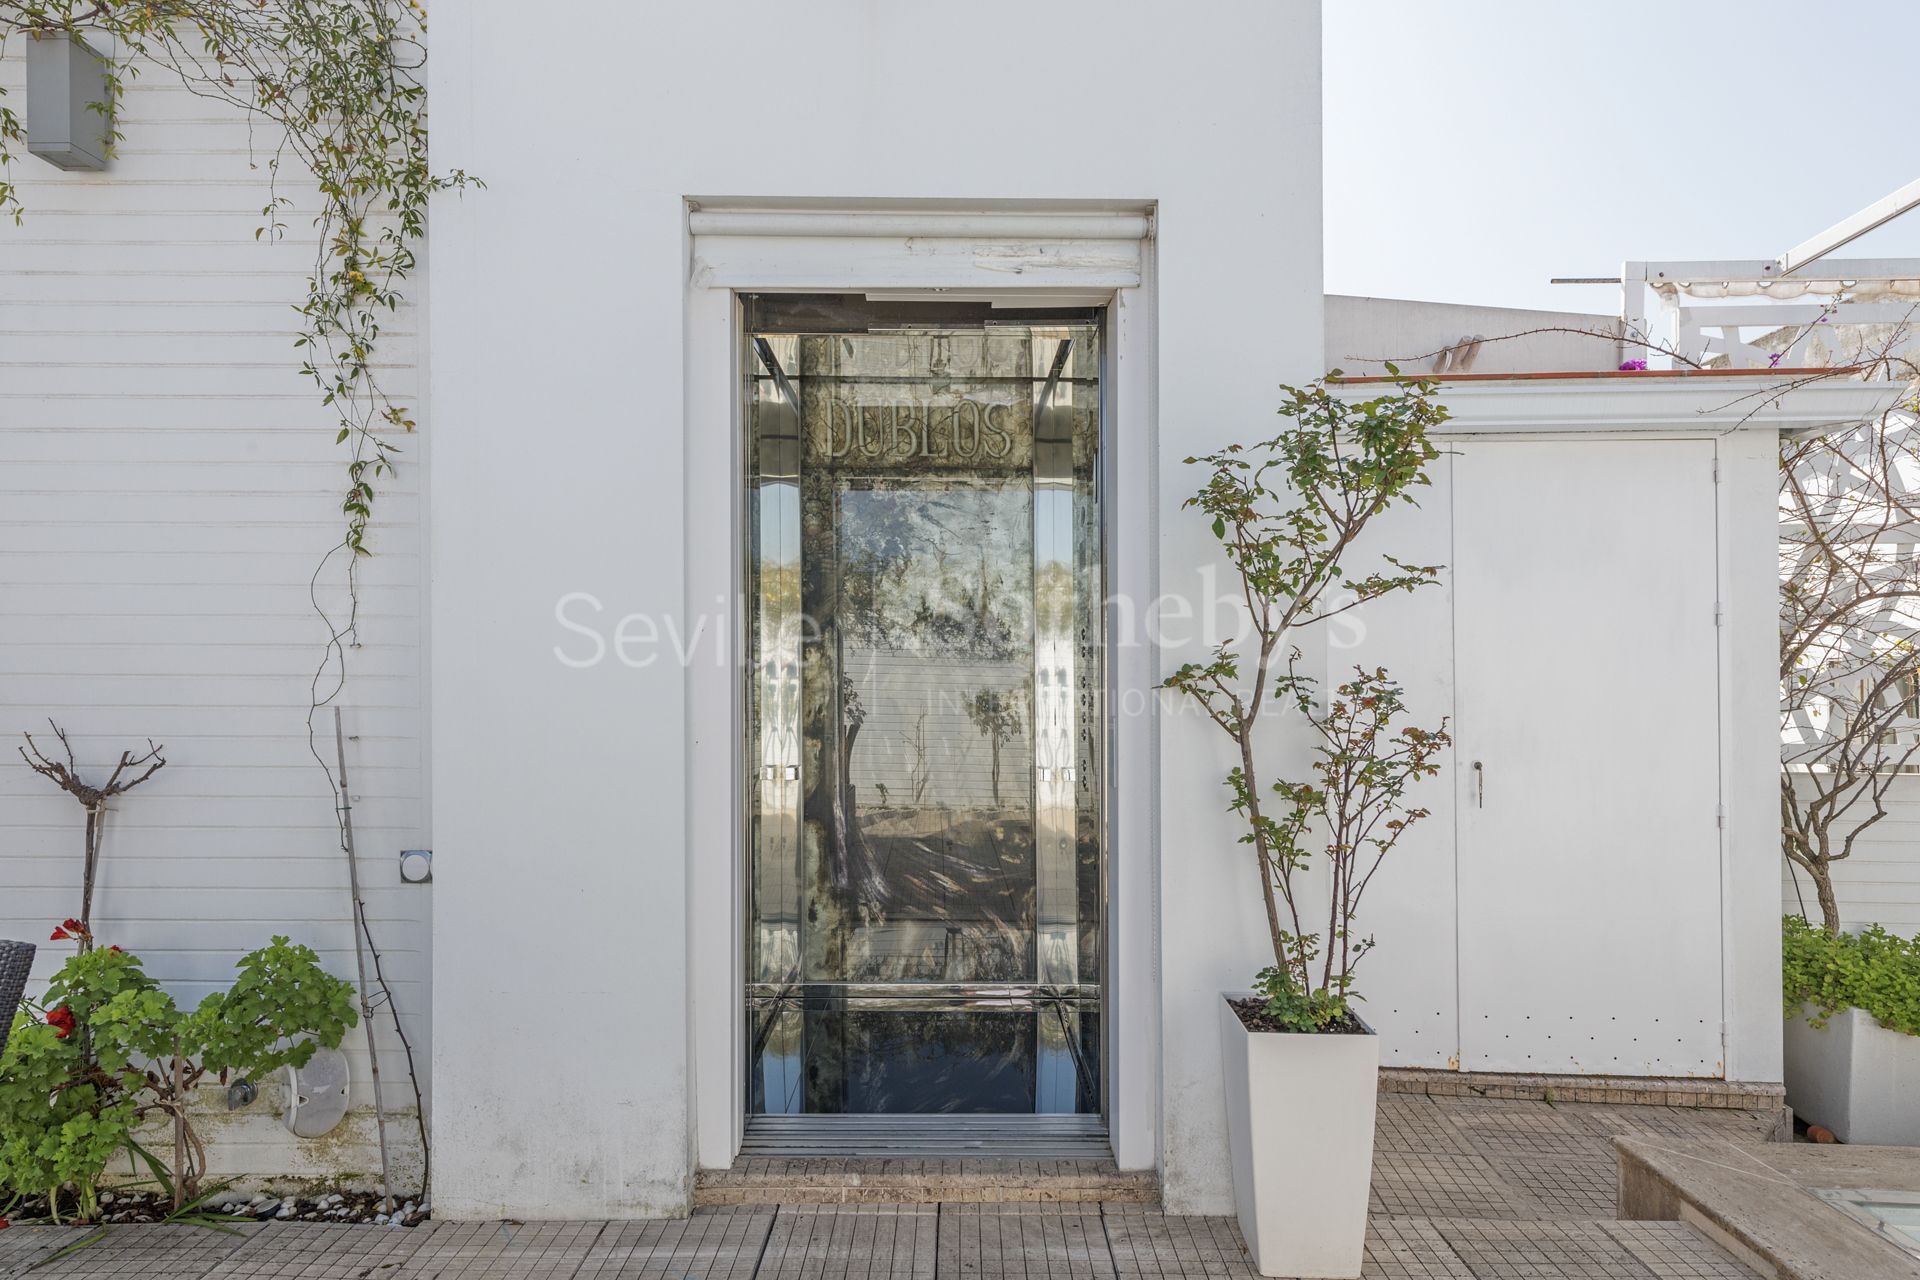 Luxurious house with terrace and private pool in one of the best locations in the center of Seville